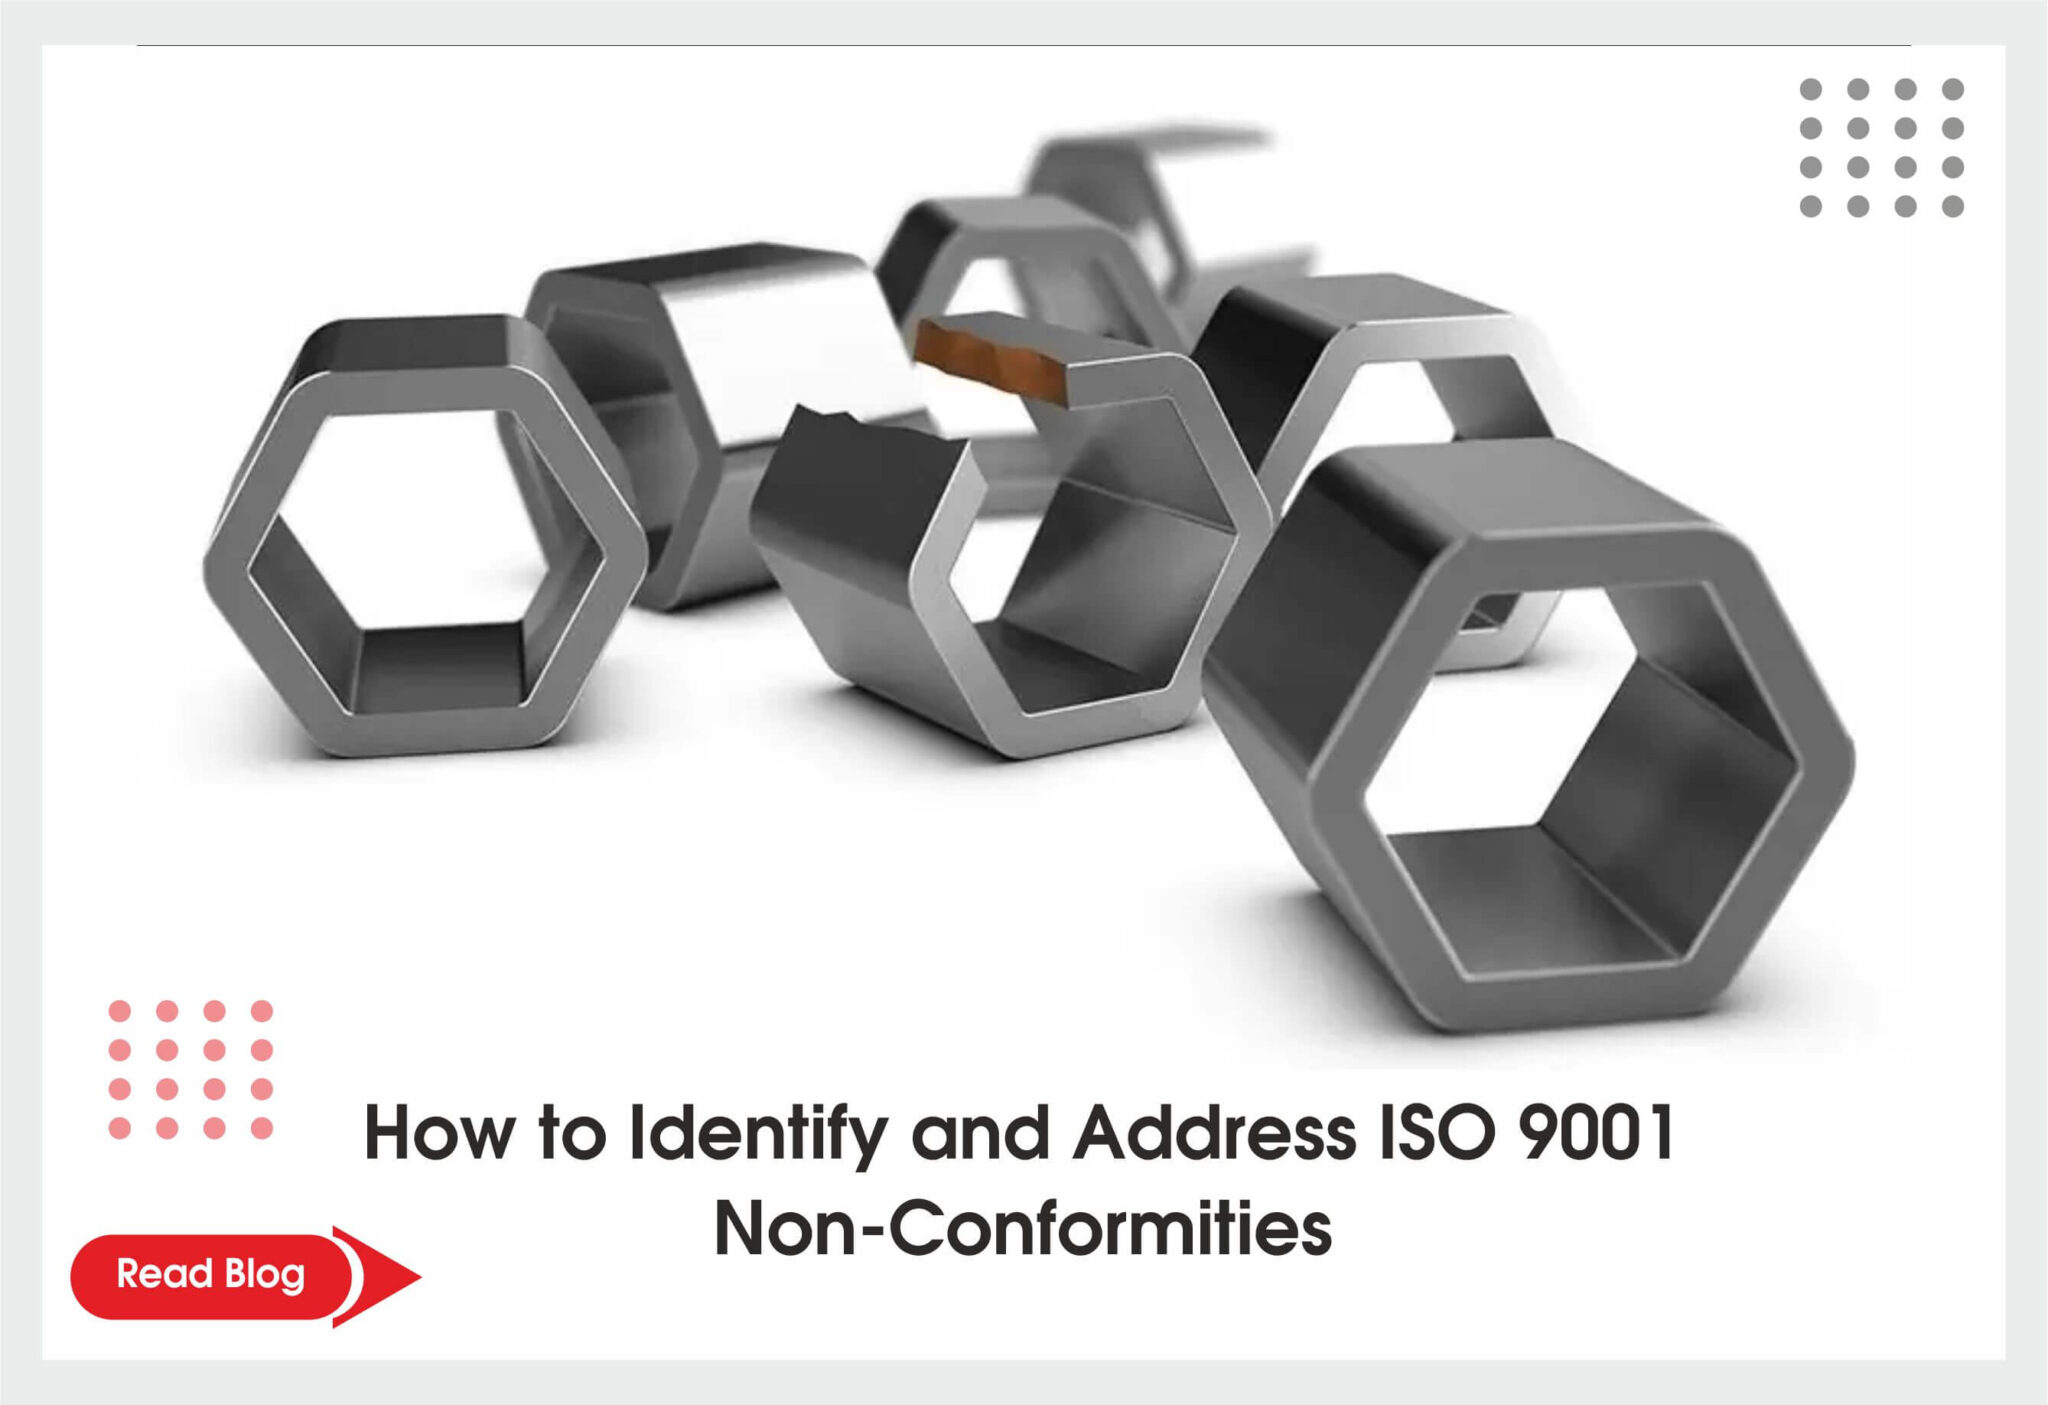 How to Identify and Address ISO 9001 Non-Conformities